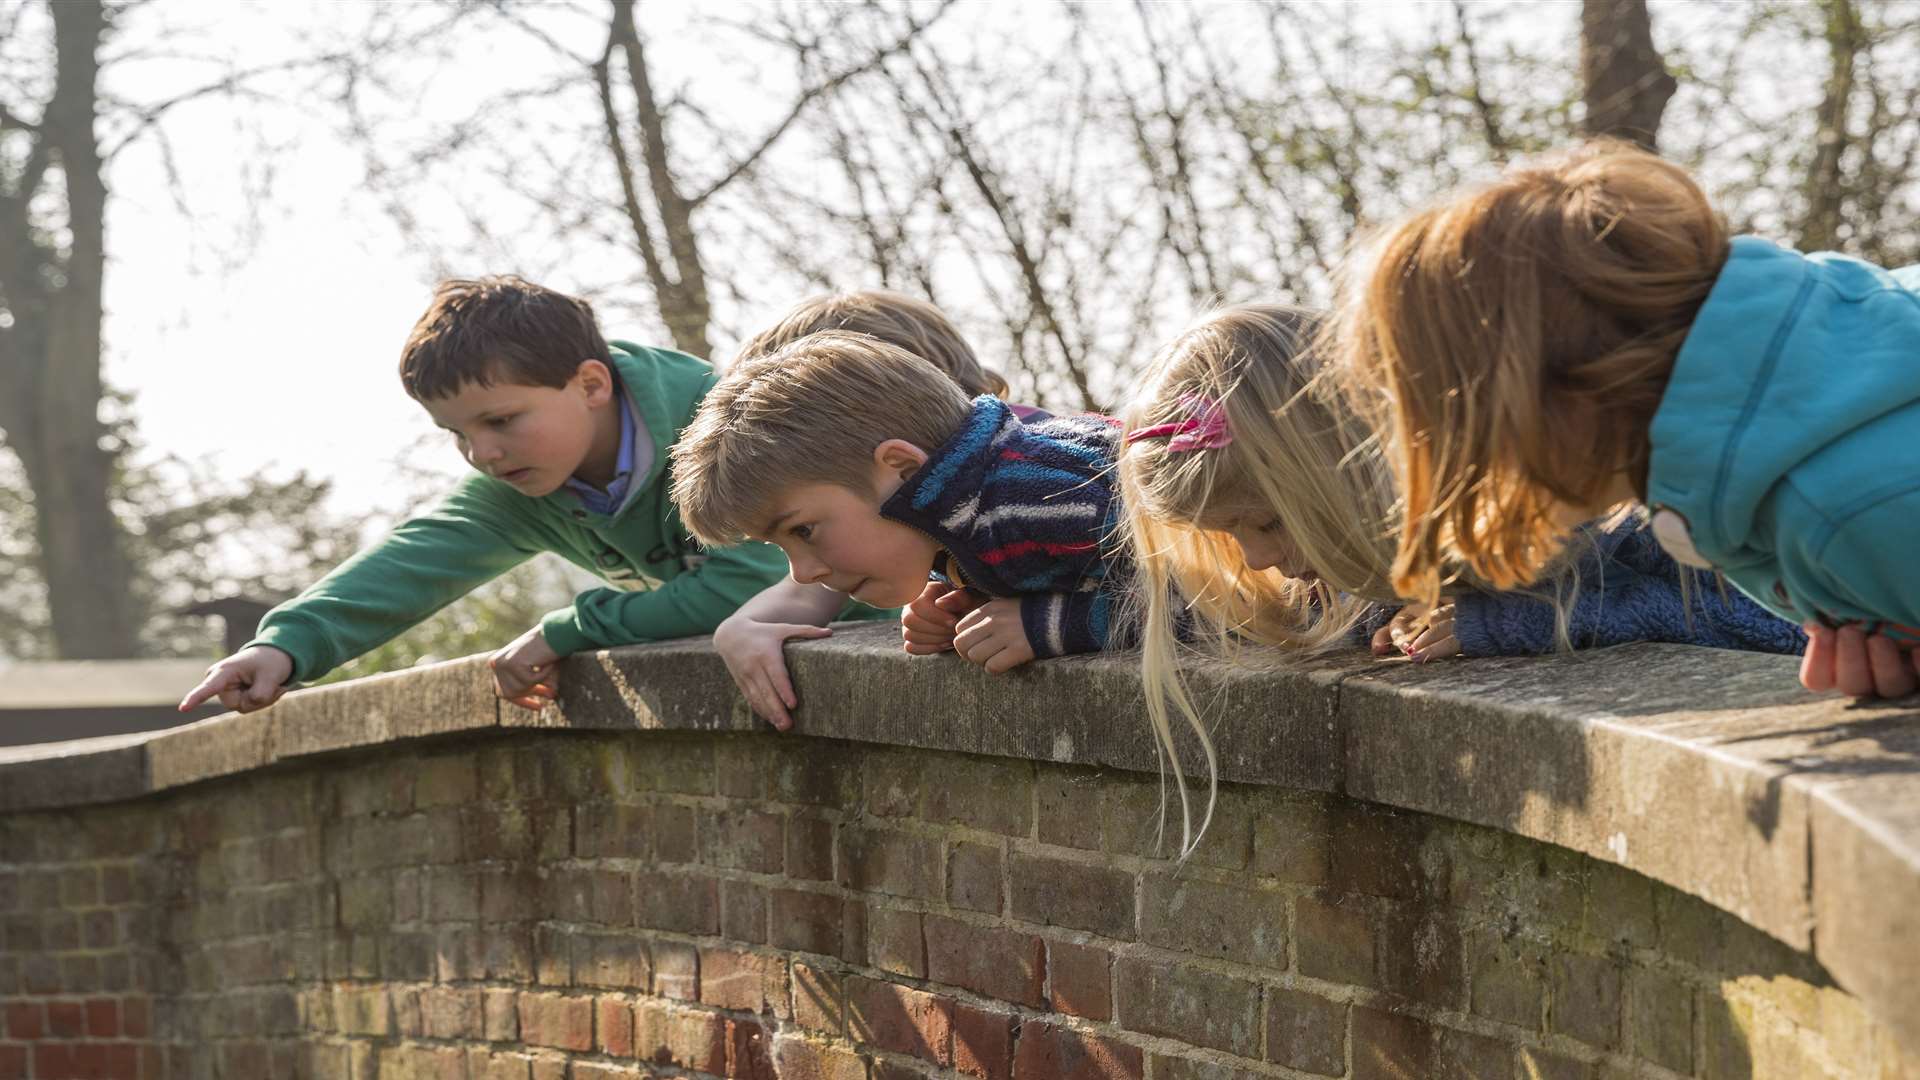 Go exploring this summer with some ideas from the National Trust